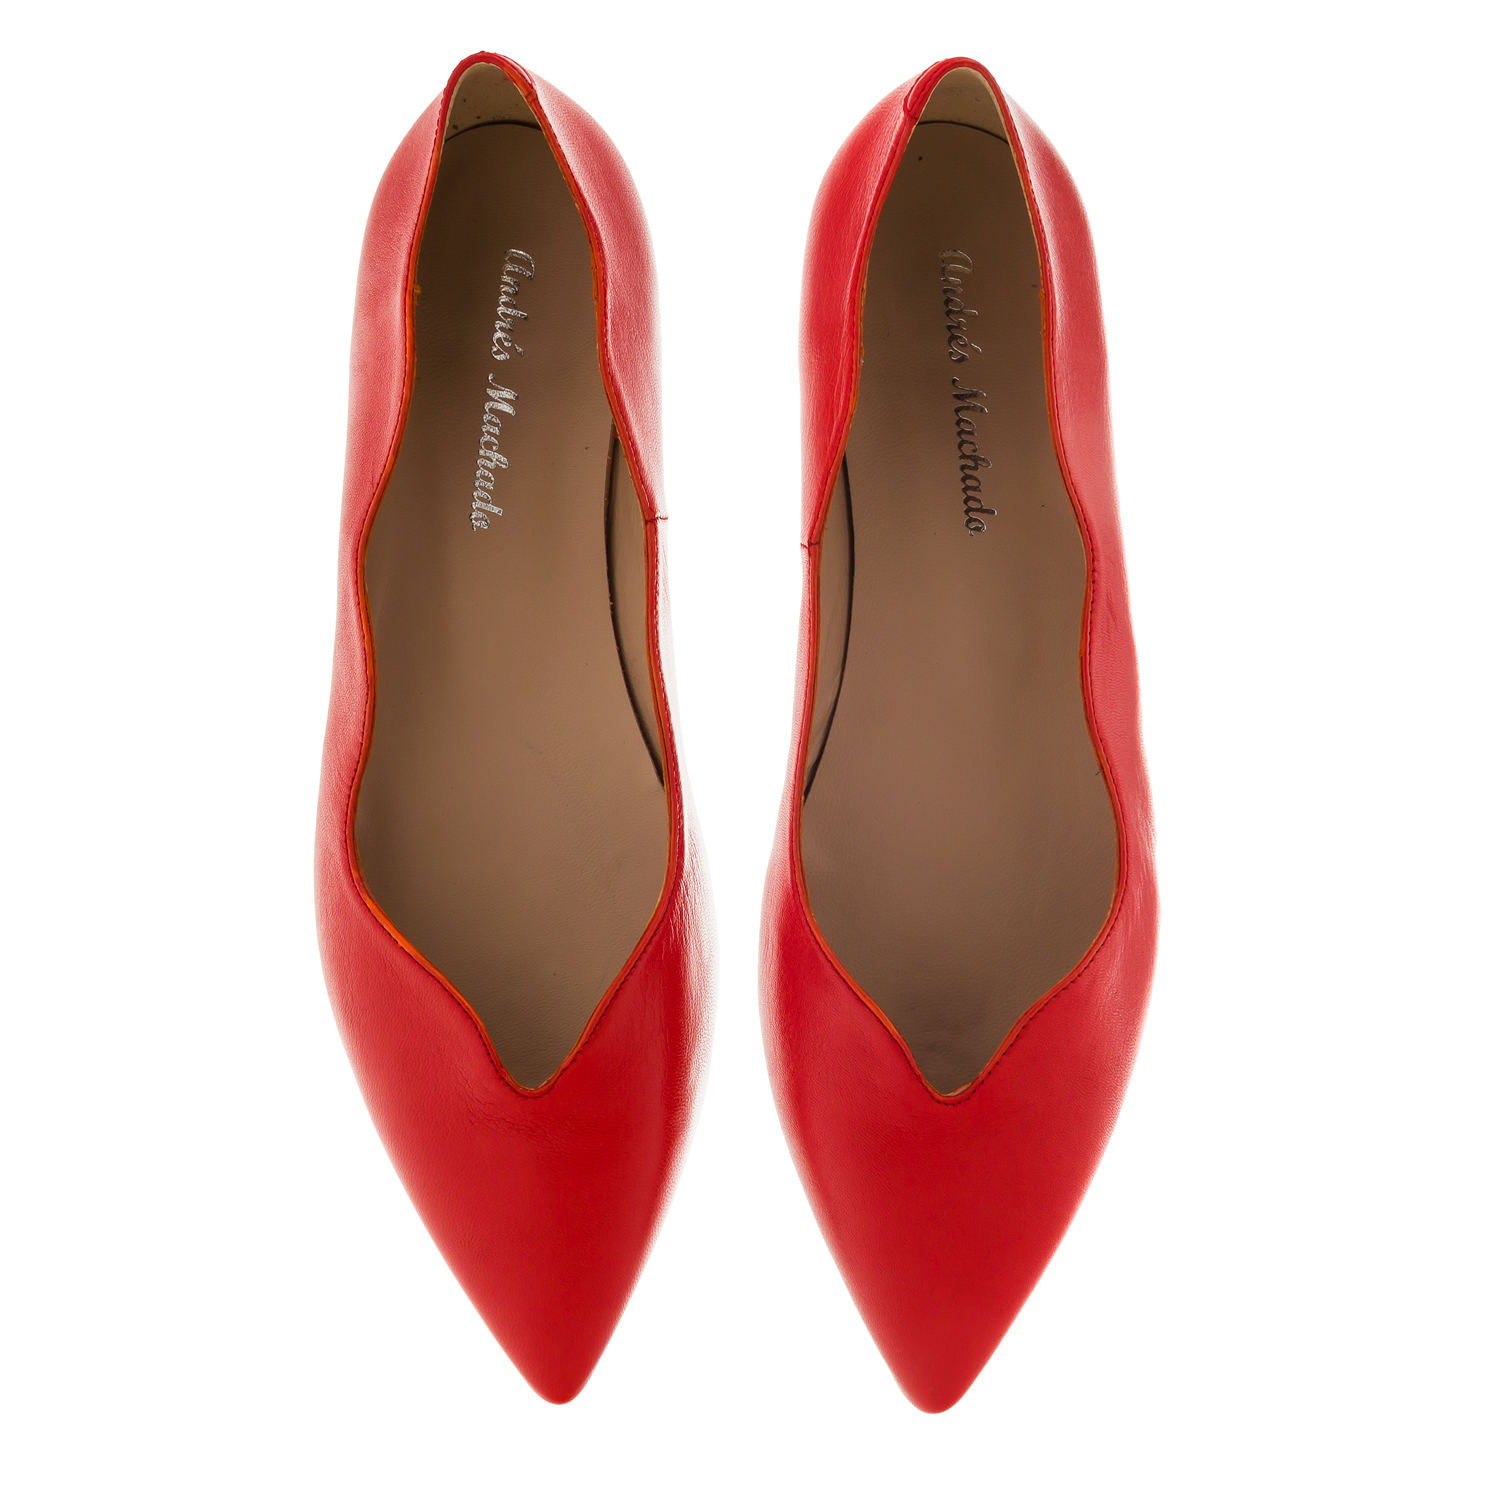 Waved Upper Ballet Flats in Red Nappa Leather 